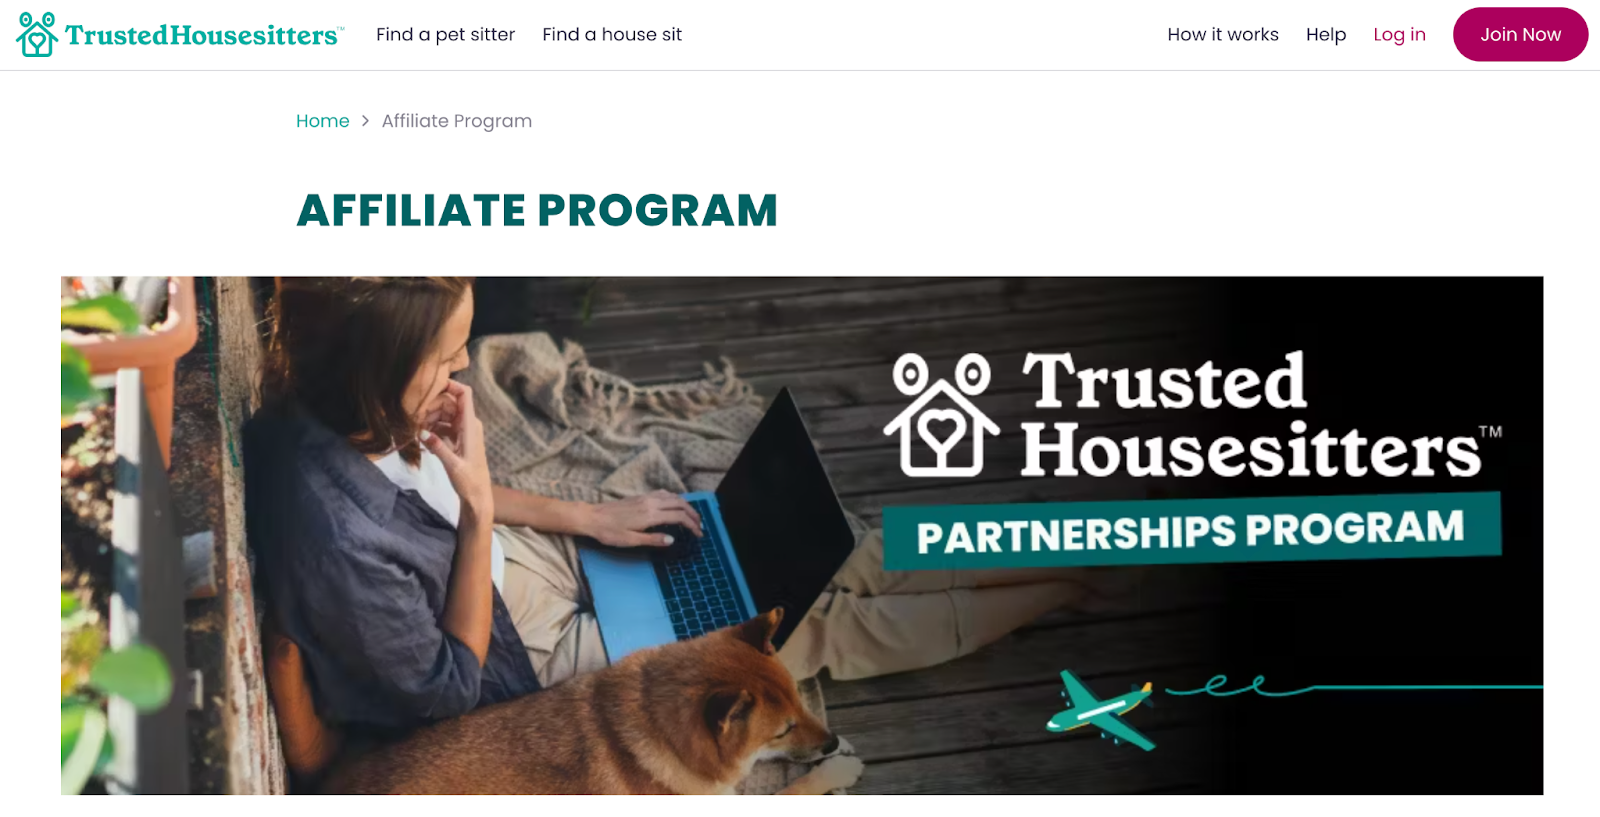 TrustedHousesitters partnerships program page on their website